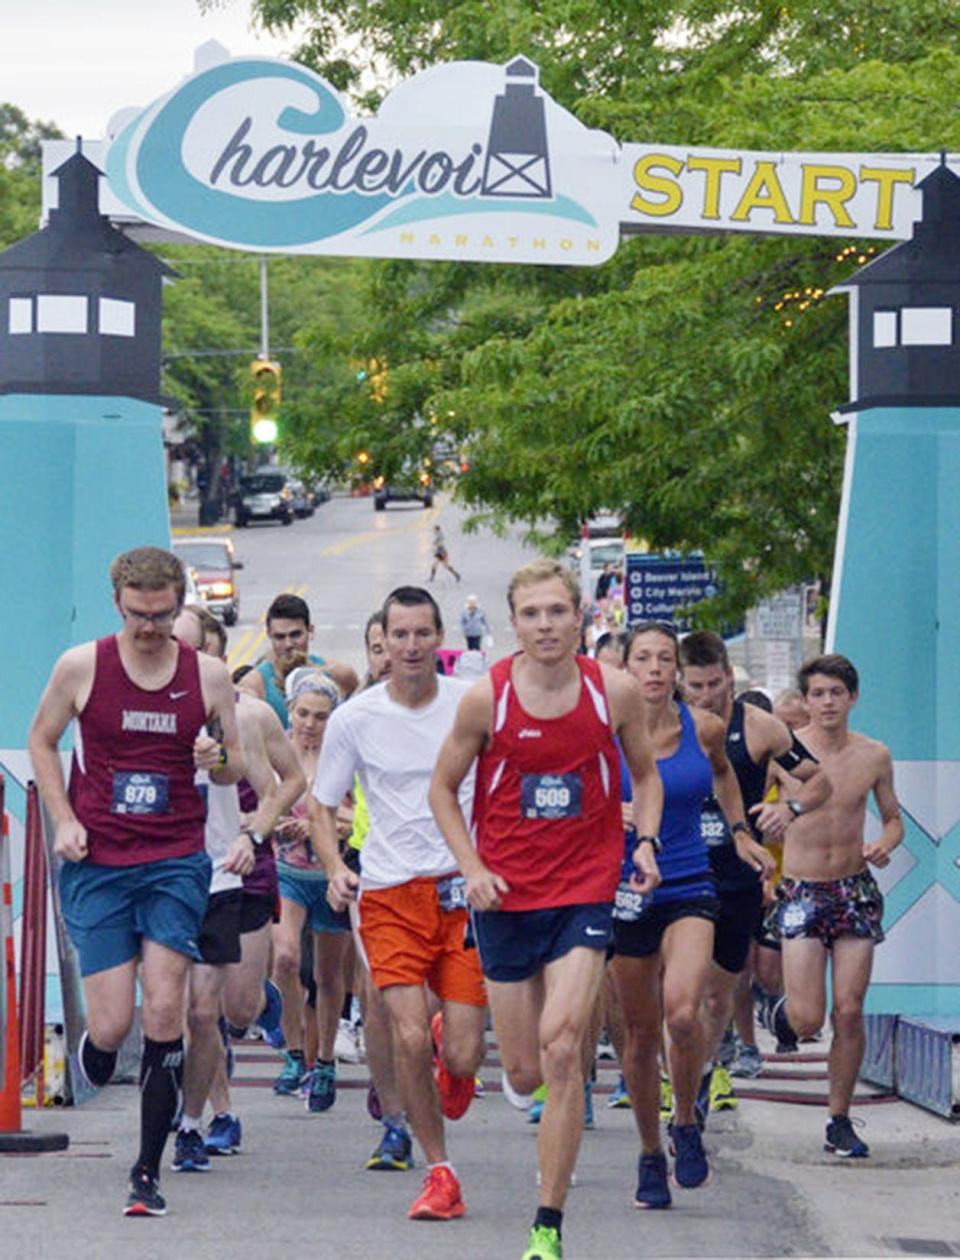 Nearly 1,500 runners took part in this past weekend's Charlevoix Marathon, which also featured a half marathon, 10k and 5k races.